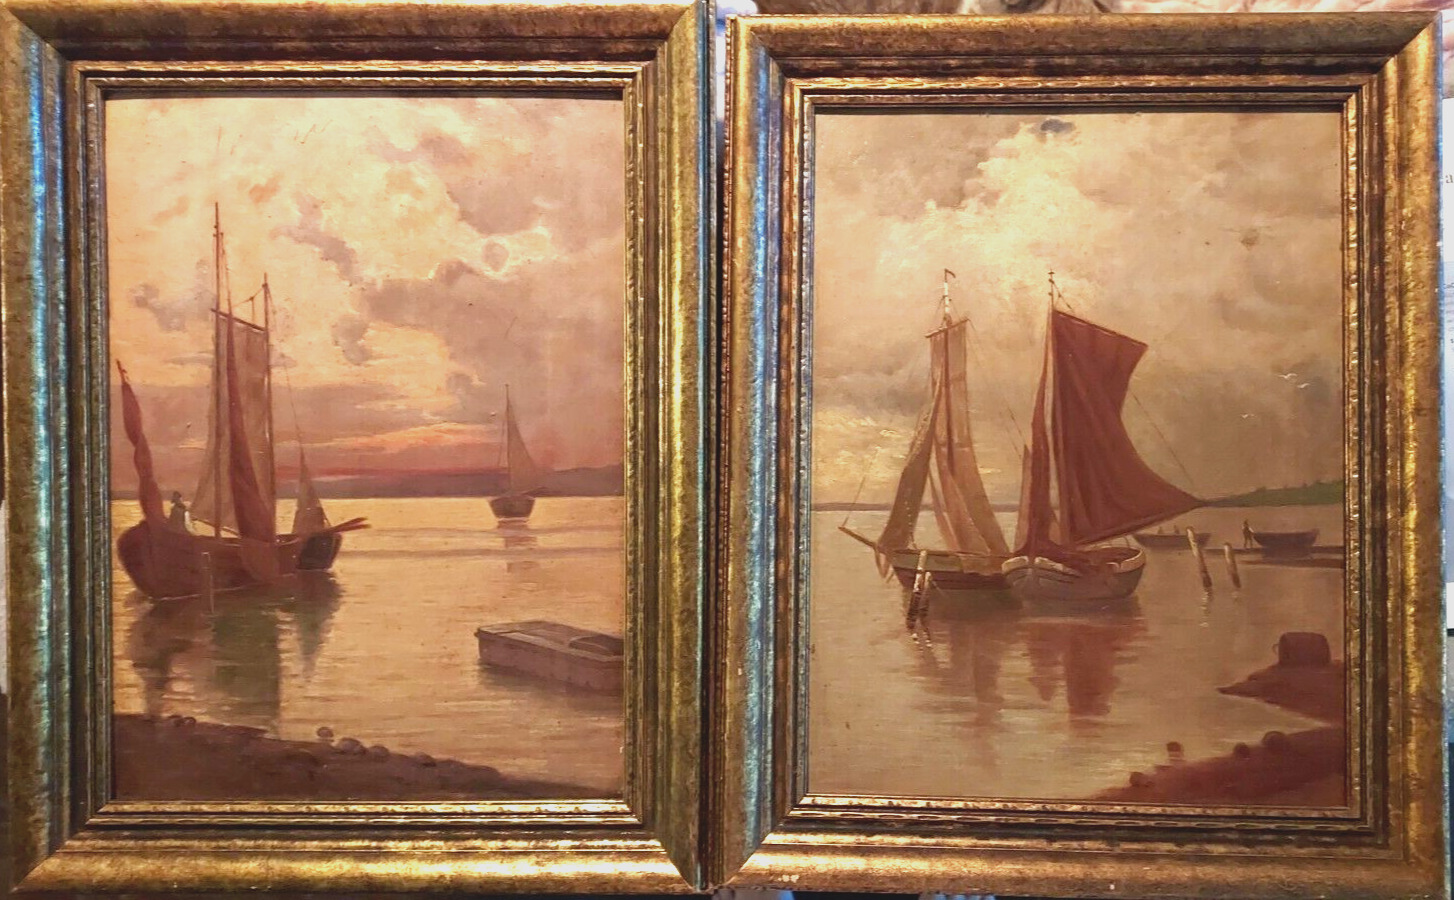 Pair of Antique Holland Oil Paintings Seascapes Dutch Old Master